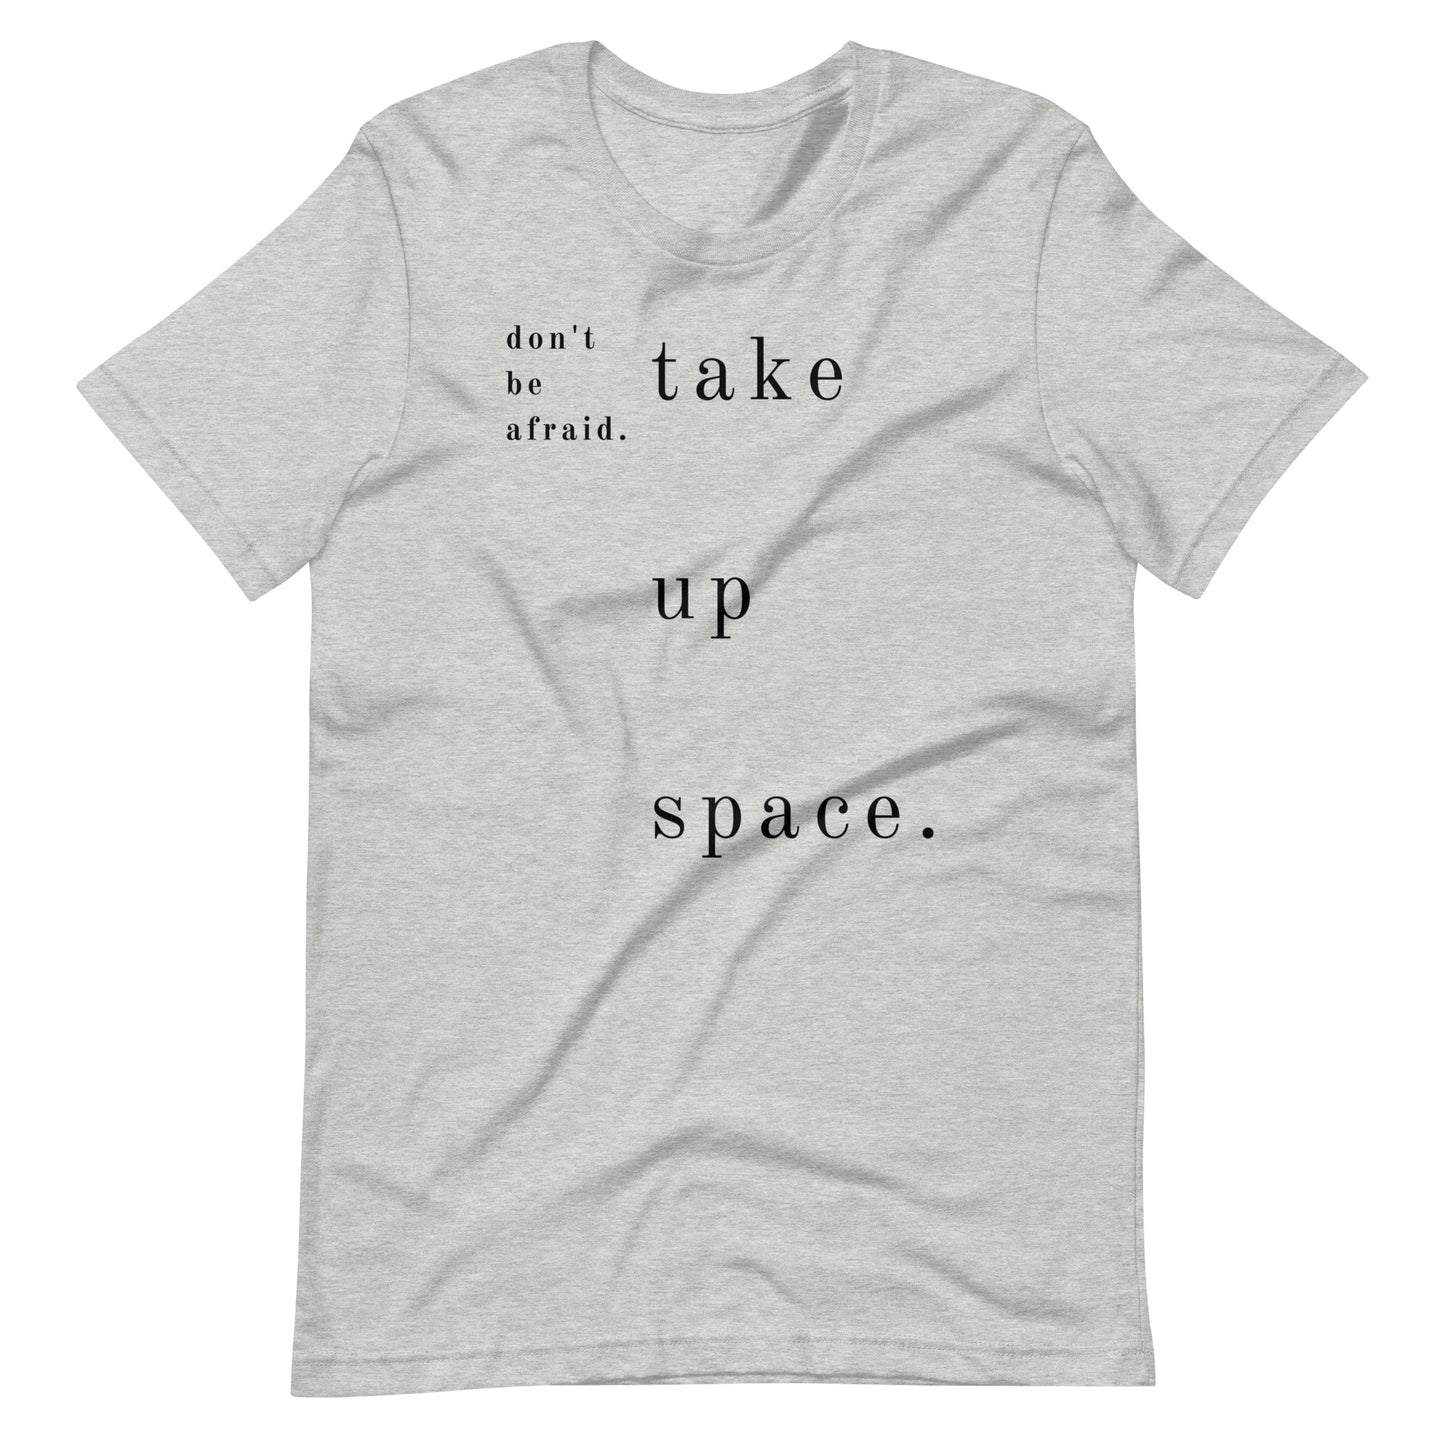 The Dance Habit T-Shirt "Take Up Space"